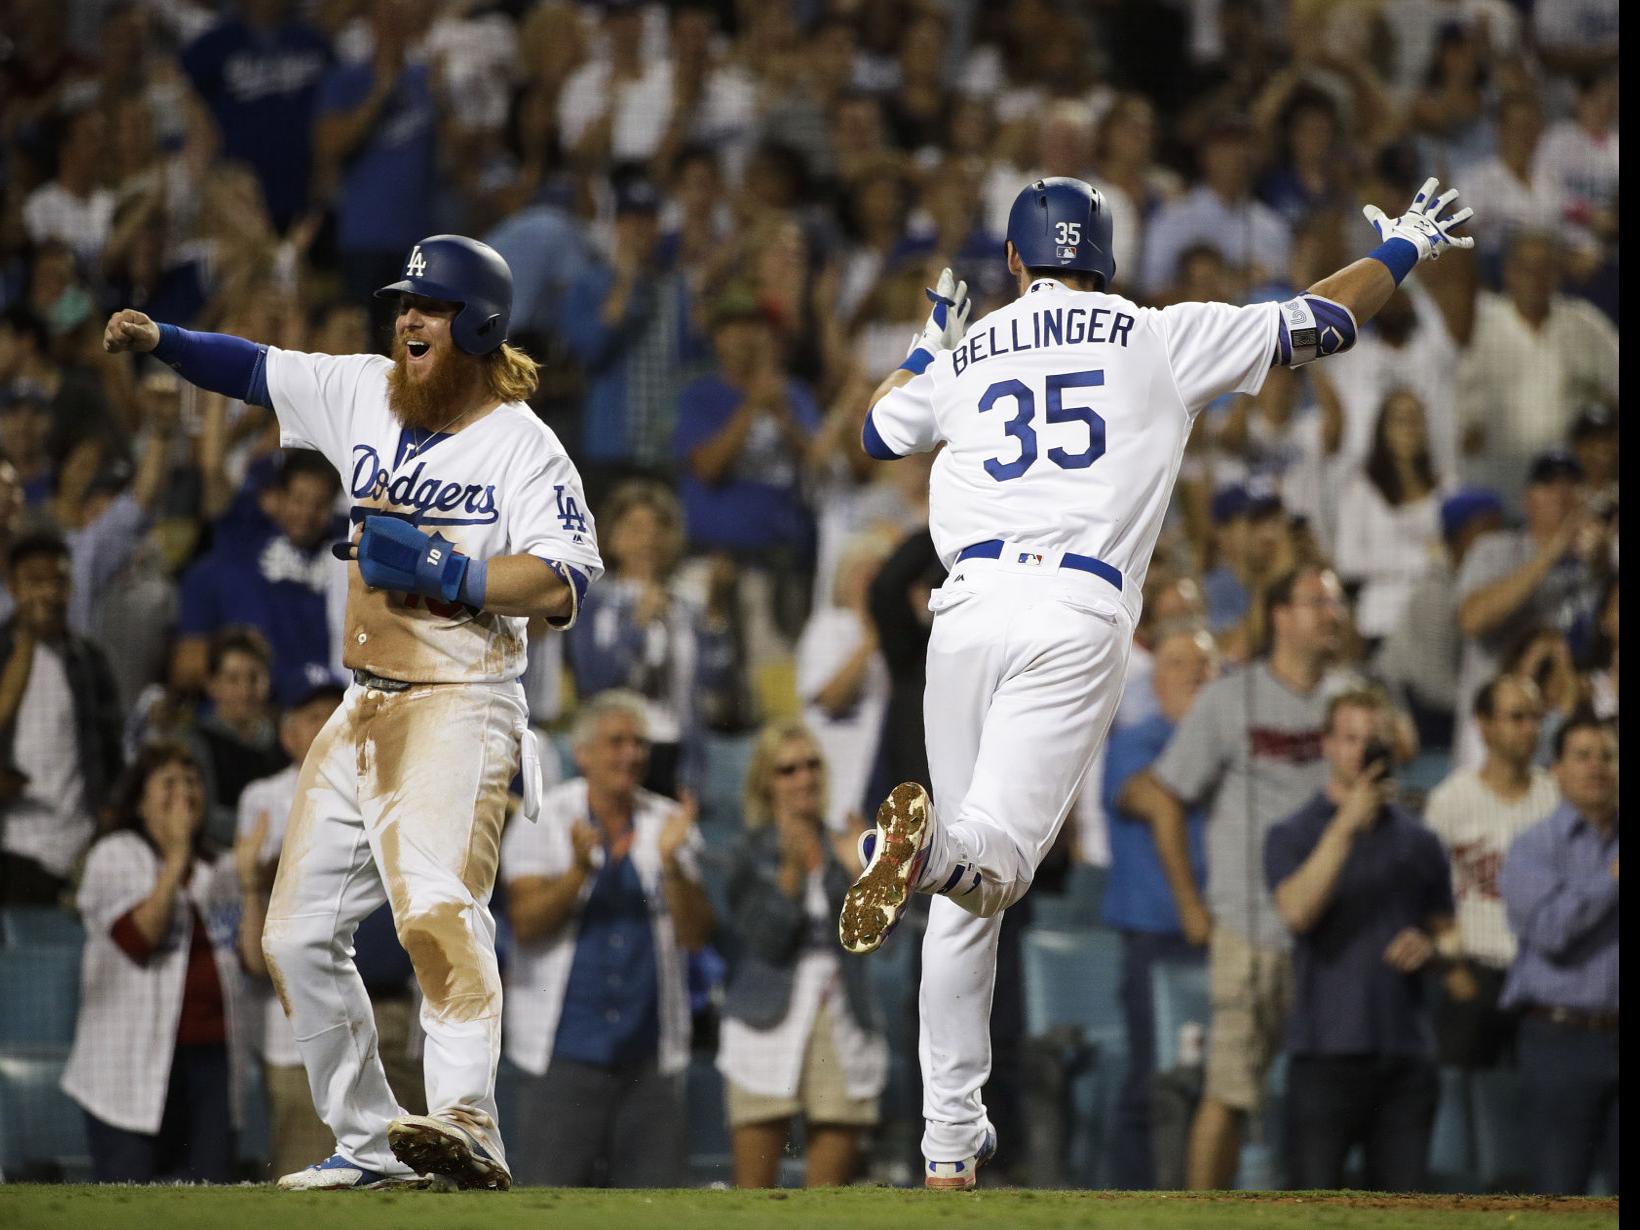 Cody Bellinger's 8th inning three-run homer leads Dodgers past Twins